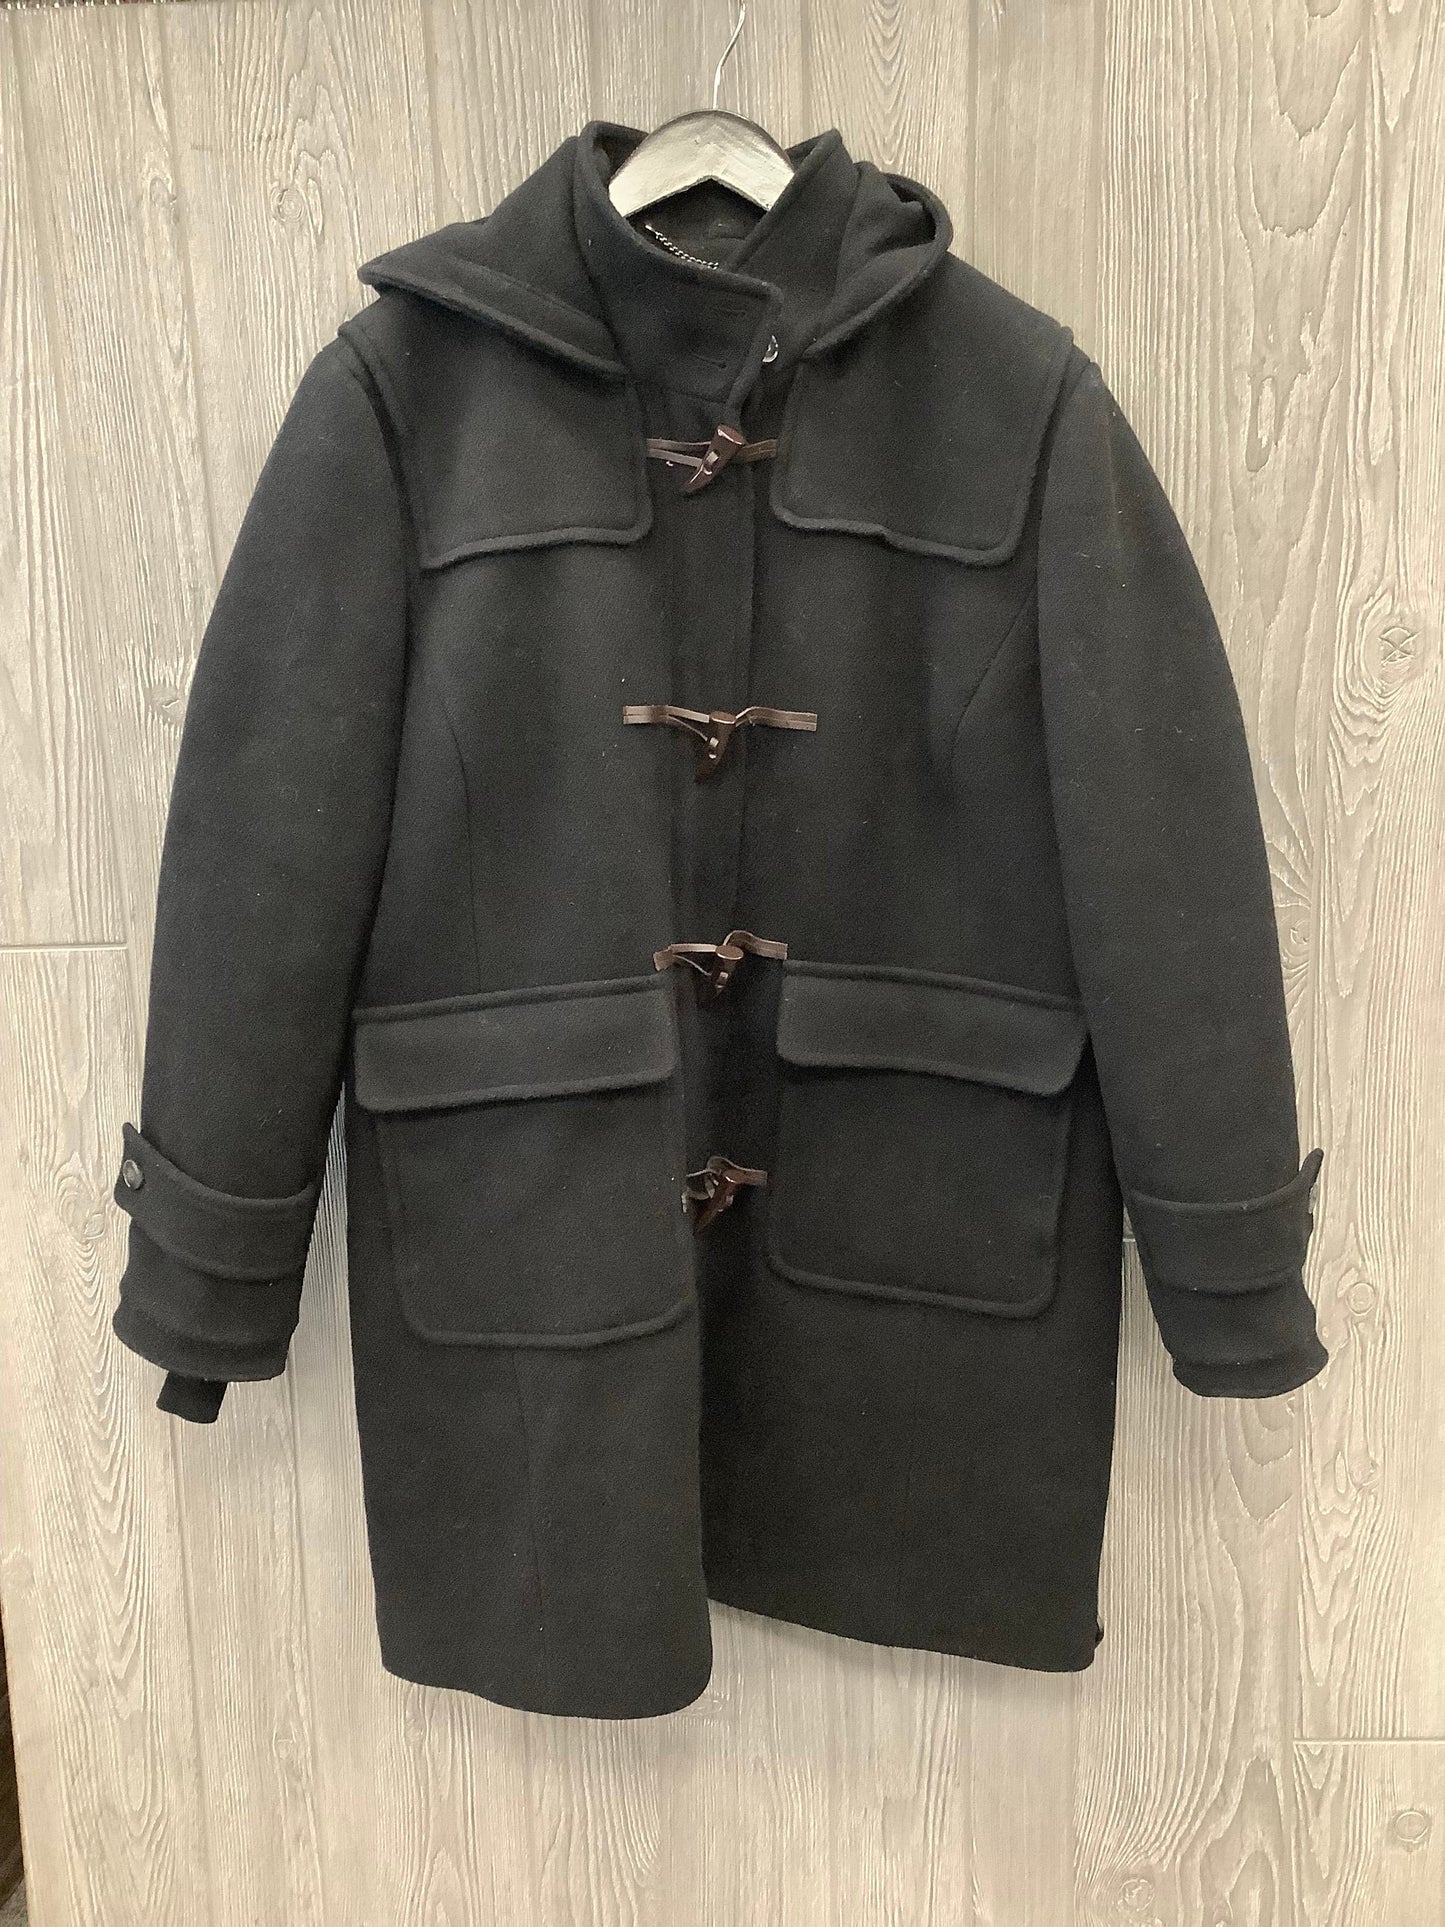 Coat Other By Lands End  Size: 2x